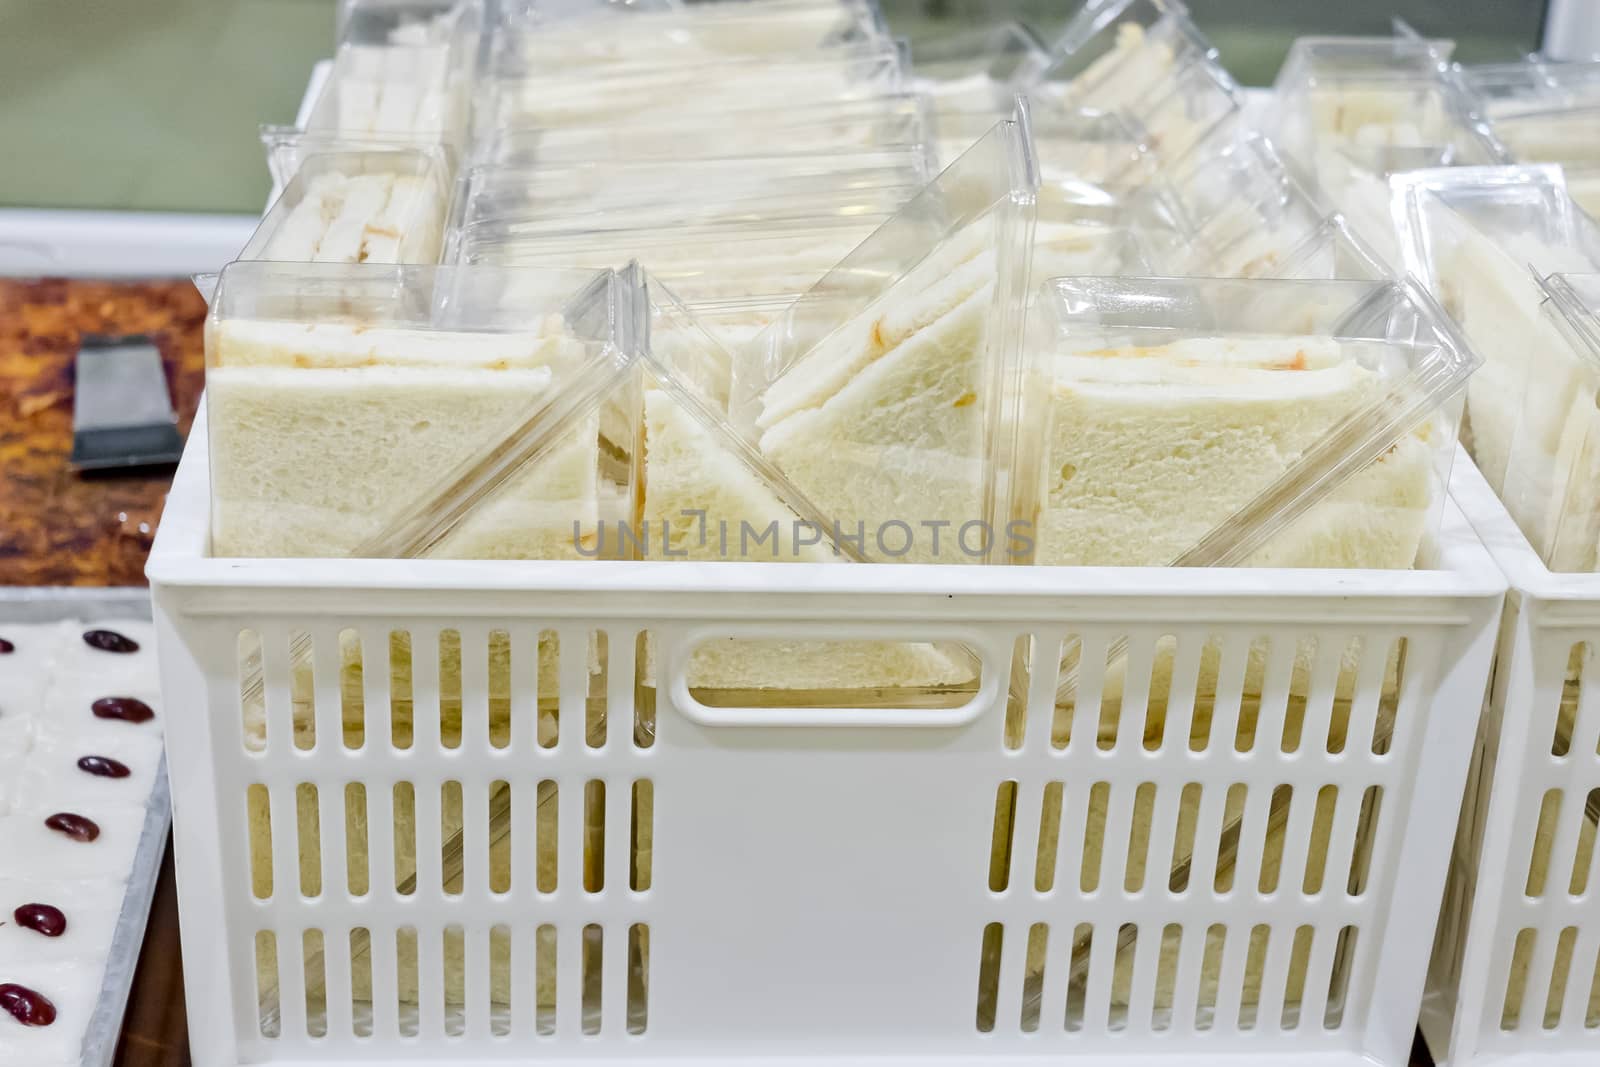 Cut platter of sandwich triangles in plastic box ready for sell